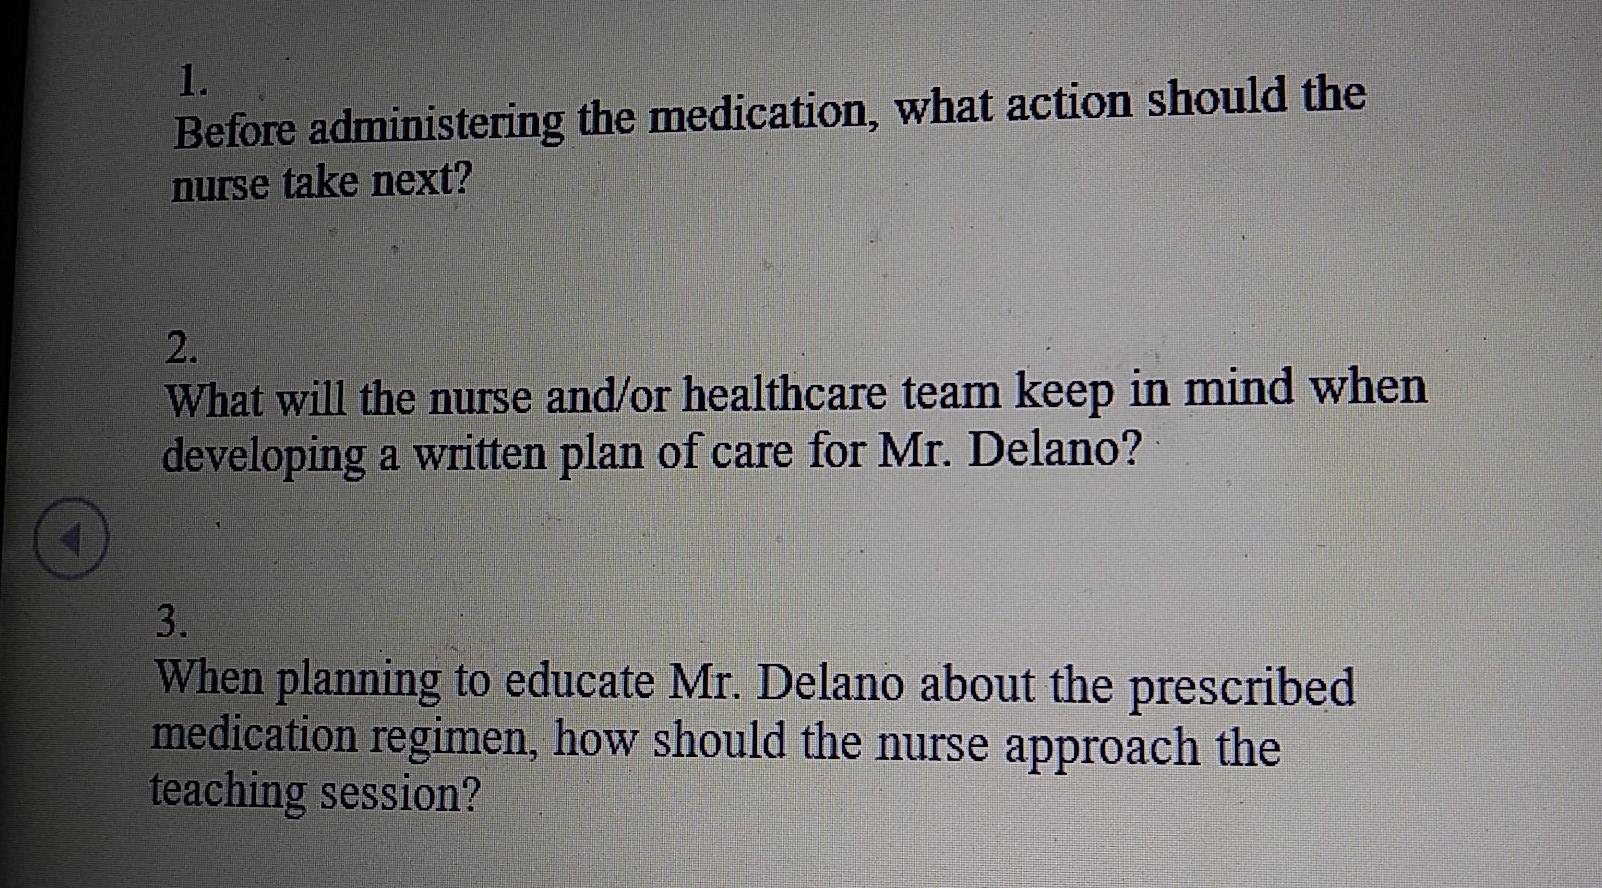 Chapter 6 Case Study Questions This Activity Contains 3 Questions Miles Delano Is A 75 Year Old Patient Who Has Been 3